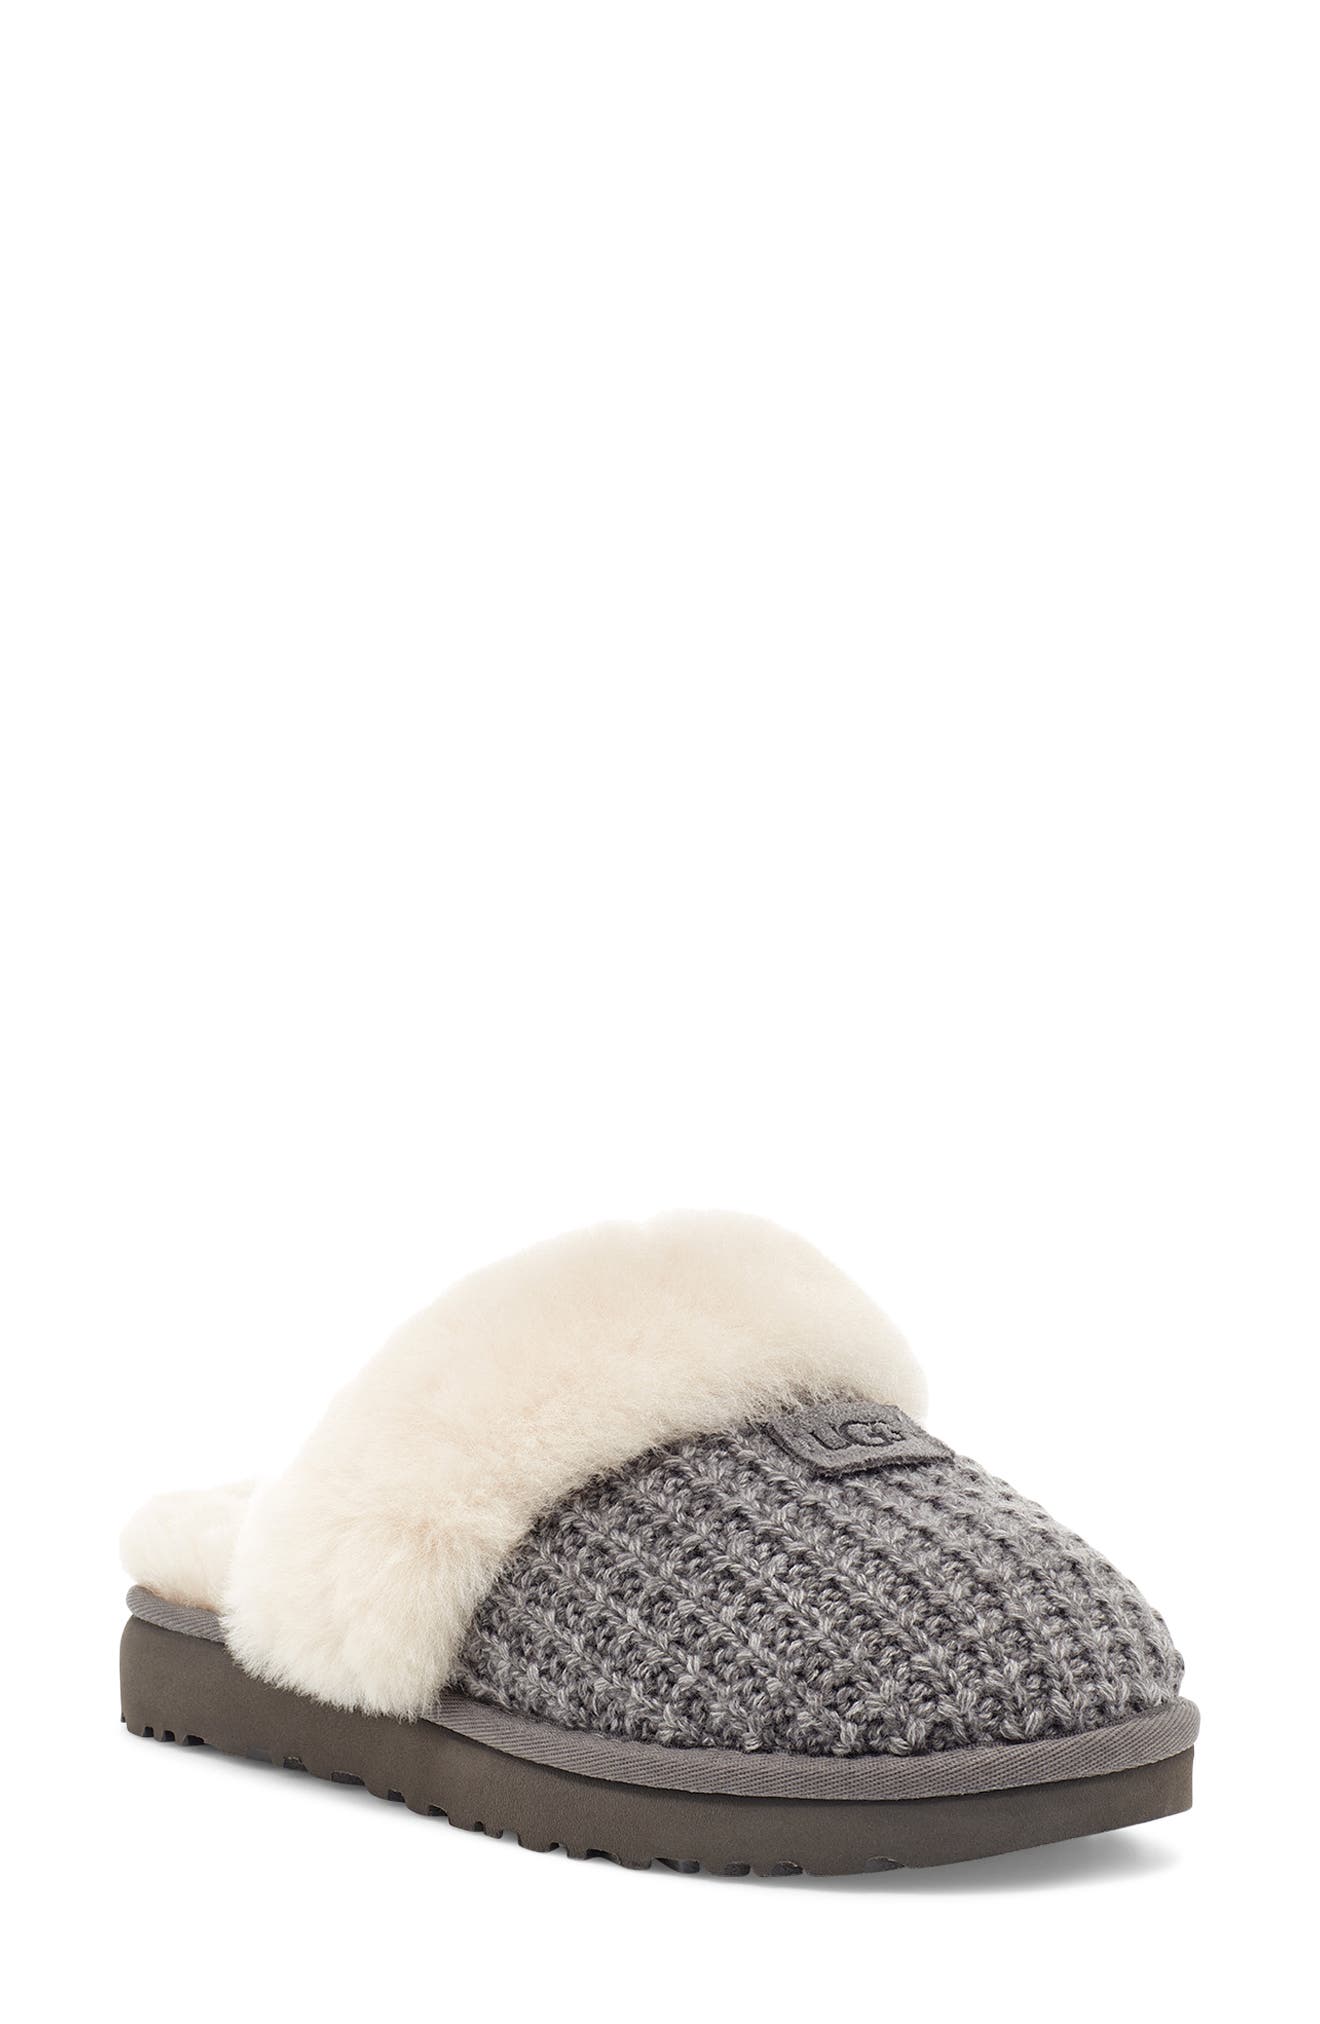 ugg knit slippers